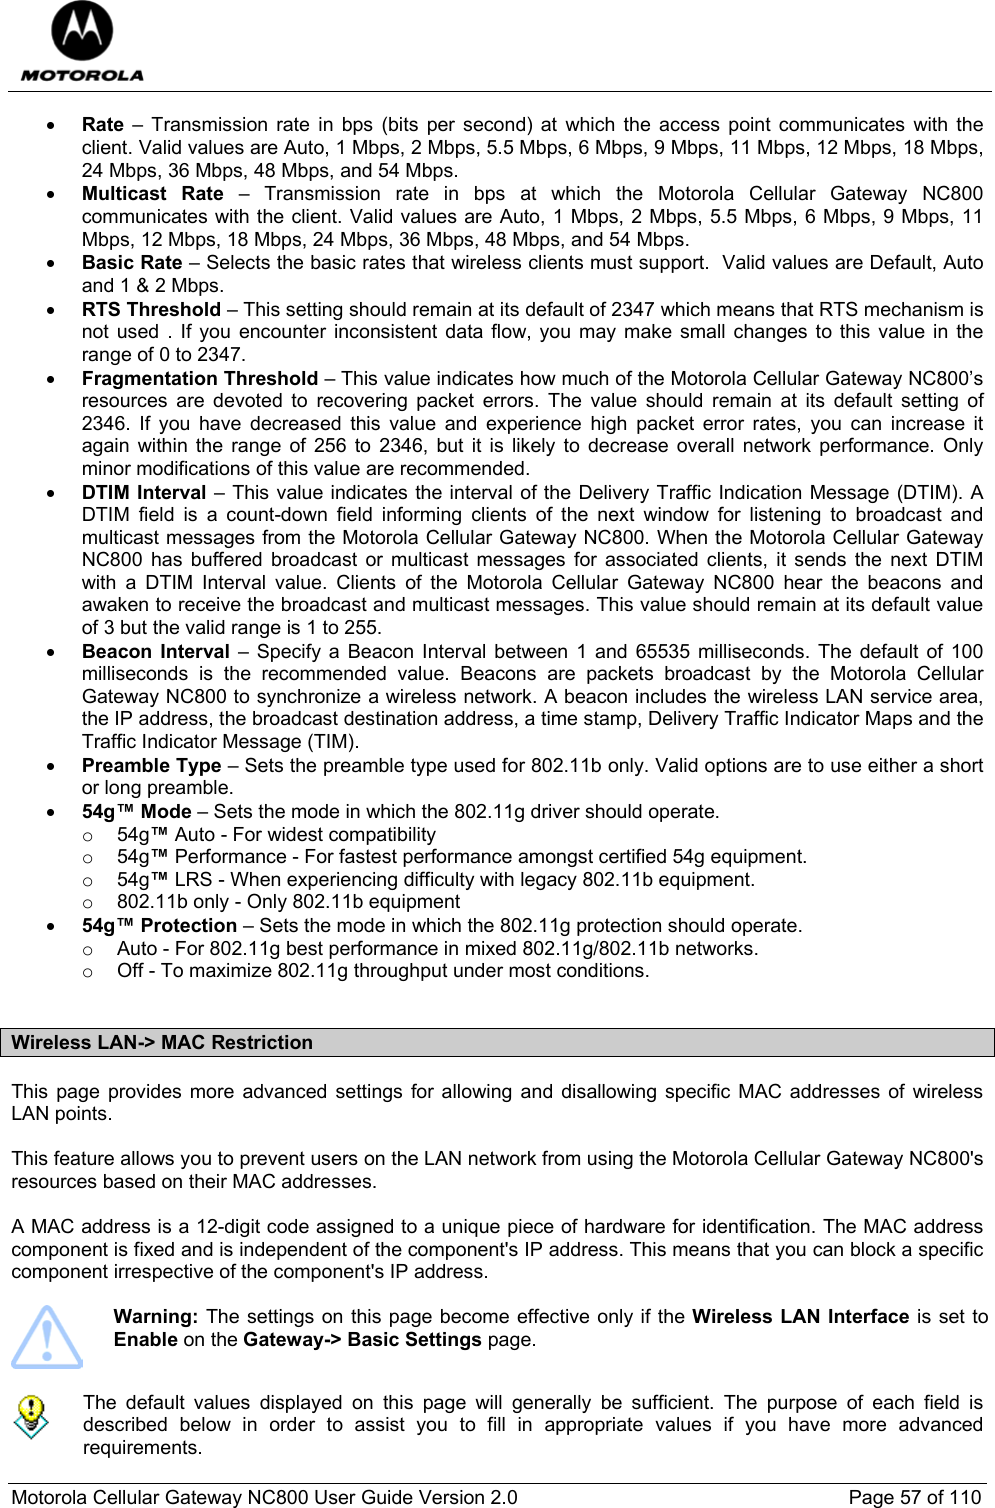  Motorola Cellular Gateway NC800 User Guide Version 2.0     Page 57 of 110  • Rate – Transmission rate in bps (bits per second) at which the access point communicates with the client. Valid values are Auto, 1 Mbps, 2 Mbps, 5.5 Mbps, 6 Mbps, 9 Mbps, 11 Mbps, 12 Mbps, 18 Mbps, 24 Mbps, 36 Mbps, 48 Mbps, and 54 Mbps.  • Multicast Rate – Transmission rate in bps at which the Motorola Cellular Gateway NC800 communicates with the client. Valid values are Auto, 1 Mbps, 2 Mbps, 5.5 Mbps, 6 Mbps, 9 Mbps, 11 Mbps, 12 Mbps, 18 Mbps, 24 Mbps, 36 Mbps, 48 Mbps, and 54 Mbps.  • Basic Rate – Selects the basic rates that wireless clients must support.  Valid values are Default, Auto and 1 &amp; 2 Mbps. • RTS Threshold – This setting should remain at its default of 2347 which means that RTS mechanism is not used . If you encounter inconsistent data flow, you may make small changes to this value in the range of 0 to 2347. • Fragmentation Threshold – This value indicates how much of the Motorola Cellular Gateway NC800’s resources are devoted to recovering packet errors. The value should remain at its default setting of 2346. If you have decreased this value and experience high packet error rates, you can increase it again within the range of 256 to 2346, but it is likely to decrease overall network performance. Only minor modifications of this value are recommended. • DTIM Interval – This value indicates the interval of the Delivery Traffic Indication Message (DTIM). A DTIM field is a count-down field informing clients of the next window for listening to broadcast and multicast messages from the Motorola Cellular Gateway NC800. When the Motorola Cellular Gateway NC800 has buffered broadcast or multicast messages for associated clients, it sends the next DTIM with a DTIM Interval value. Clients of the Motorola Cellular Gateway NC800 hear the beacons and awaken to receive the broadcast and multicast messages. This value should remain at its default value of 3 but the valid range is 1 to 255.  • Beacon Interval – Specify a Beacon Interval between 1 and 65535 milliseconds. The default of 100 milliseconds is the recommended value. Beacons are packets broadcast by the Motorola Cellular Gateway NC800 to synchronize a wireless network. A beacon includes the wireless LAN service area, the IP address, the broadcast destination address, a time stamp, Delivery Traffic Indicator Maps and the Traffic Indicator Message (TIM). • Preamble Type – Sets the preamble type used for 802.11b only. Valid options are to use either a short or long preamble. • 54g™ Mode – Sets the mode in which the 802.11g driver should operate.  o 54g™ Auto - For widest compatibility  o 54g™ Performance - For fastest performance amongst certified 54g equipment.  o 54g™ LRS - When experiencing difficulty with legacy 802.11b equipment.  o  802.11b only - Only 802.11b equipment  • 54g™ Protection – Sets the mode in which the 802.11g protection should operate.  o  Auto - For 802.11g best performance in mixed 802.11g/802.11b networks.  o  Off - To maximize 802.11g throughput under most conditions.   Wireless LAN-&gt; MAC Restriction  This page provides more advanced settings for allowing and disallowing specific MAC addresses of wireless LAN points.  This feature allows you to prevent users on the LAN network from using the Motorola Cellular Gateway NC800&apos;s resources based on their MAC addresses.   A MAC address is a 12-digit code assigned to a unique piece of hardware for identification. The MAC address component is fixed and is independent of the component&apos;s IP address. This means that you can block a specific component irrespective of the component&apos;s IP address.   Warning: The settings on this page become effective only if the Wireless LAN Interface is set to Enable on the Gateway-&gt; Basic Settings page.     The default values displayed on this page will generally be sufficient. The purpose of each field is described below in order to assist you to fill in appropriate values if you have more advanced requirements.  